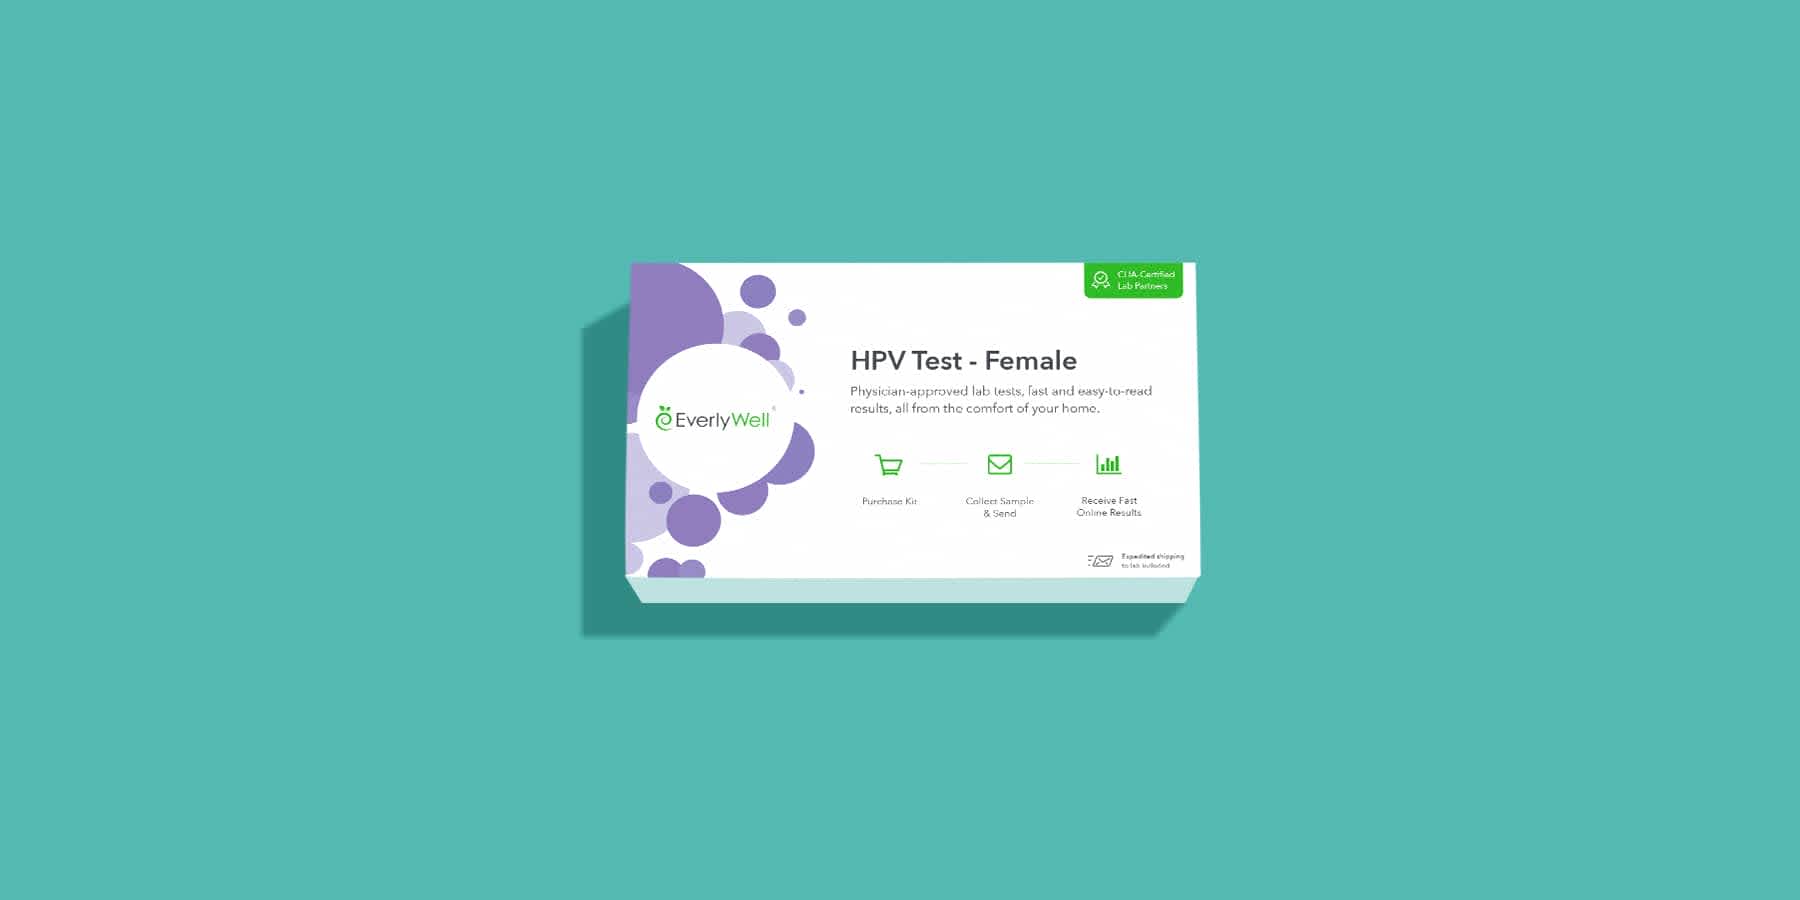 Image of Everlywell HPV Test kit against a teal background